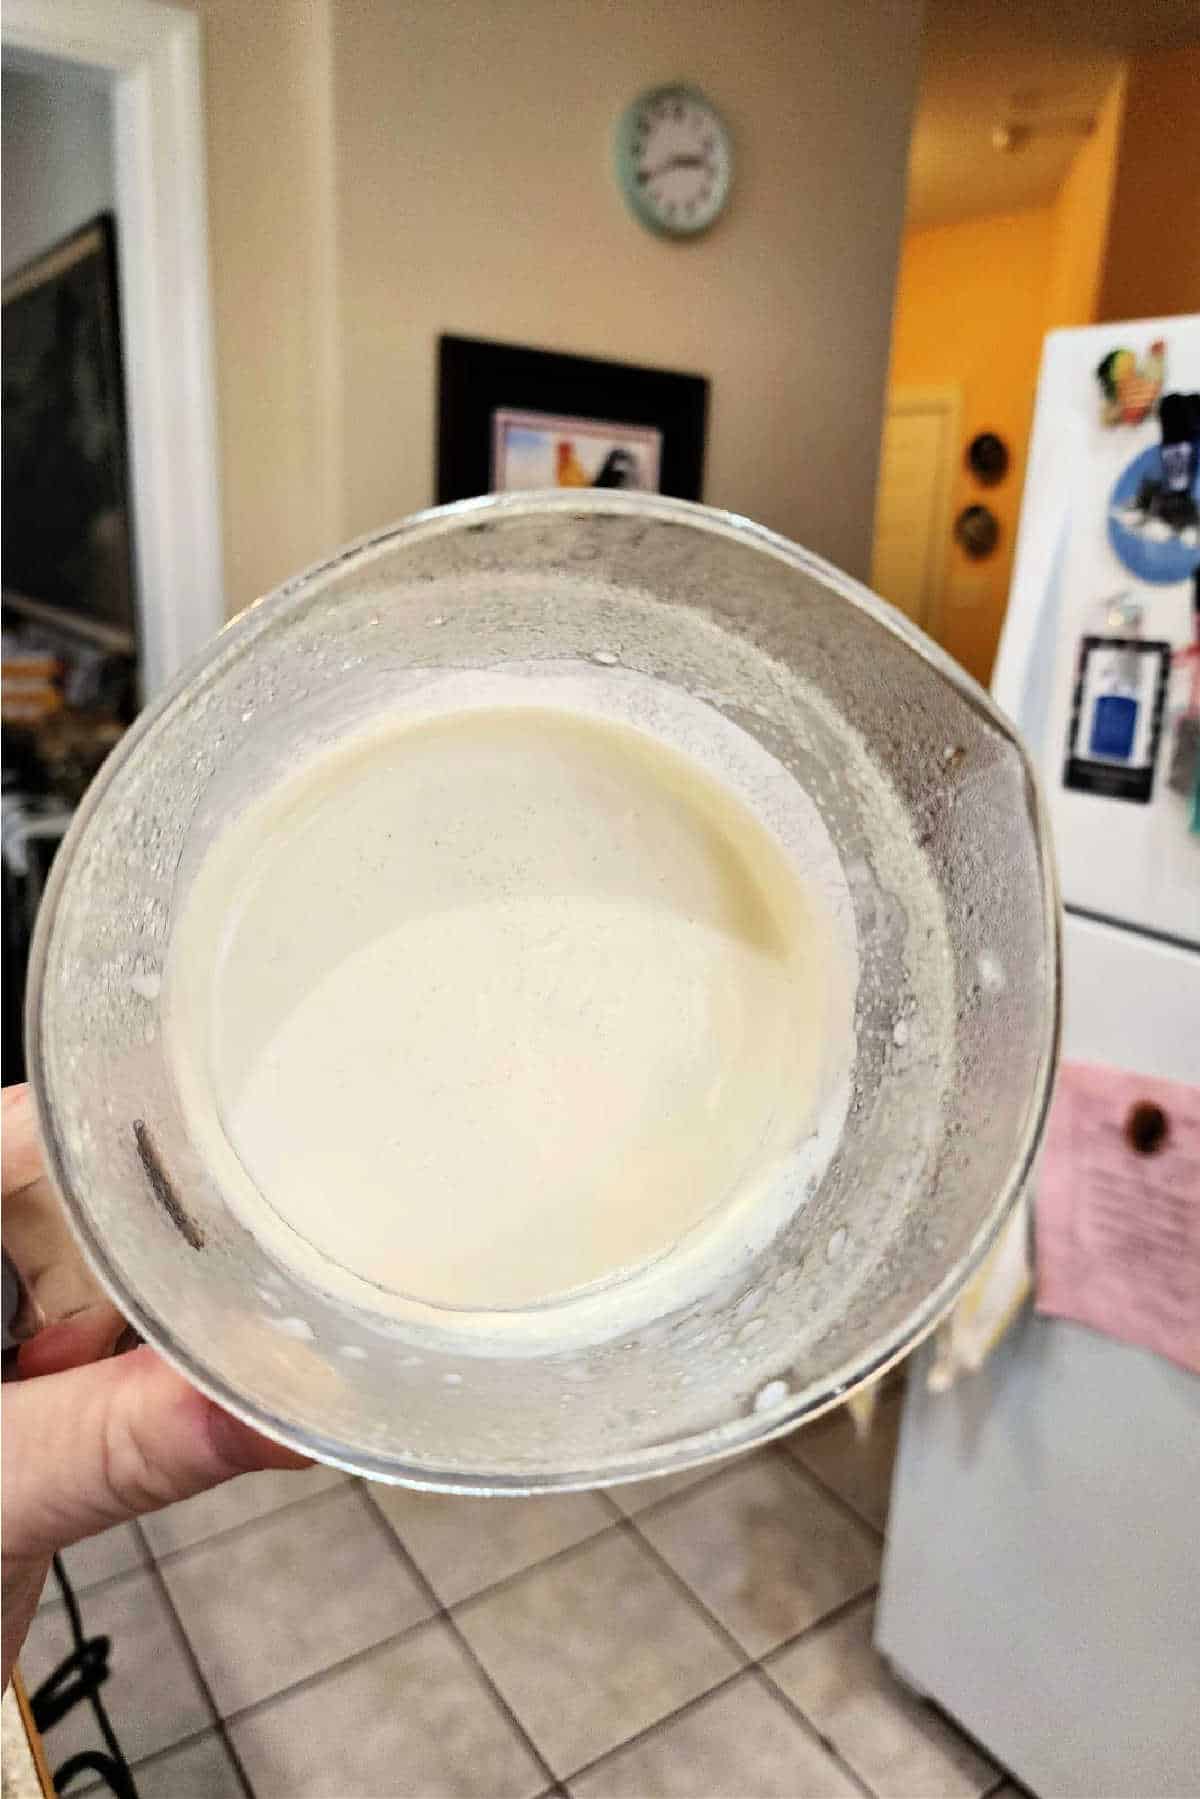 A clear plastic measuring cup help with the opening perpendicular to the floor showing how solidly thick the creme fraiche inside it is. It is not even sliding toward the opening.